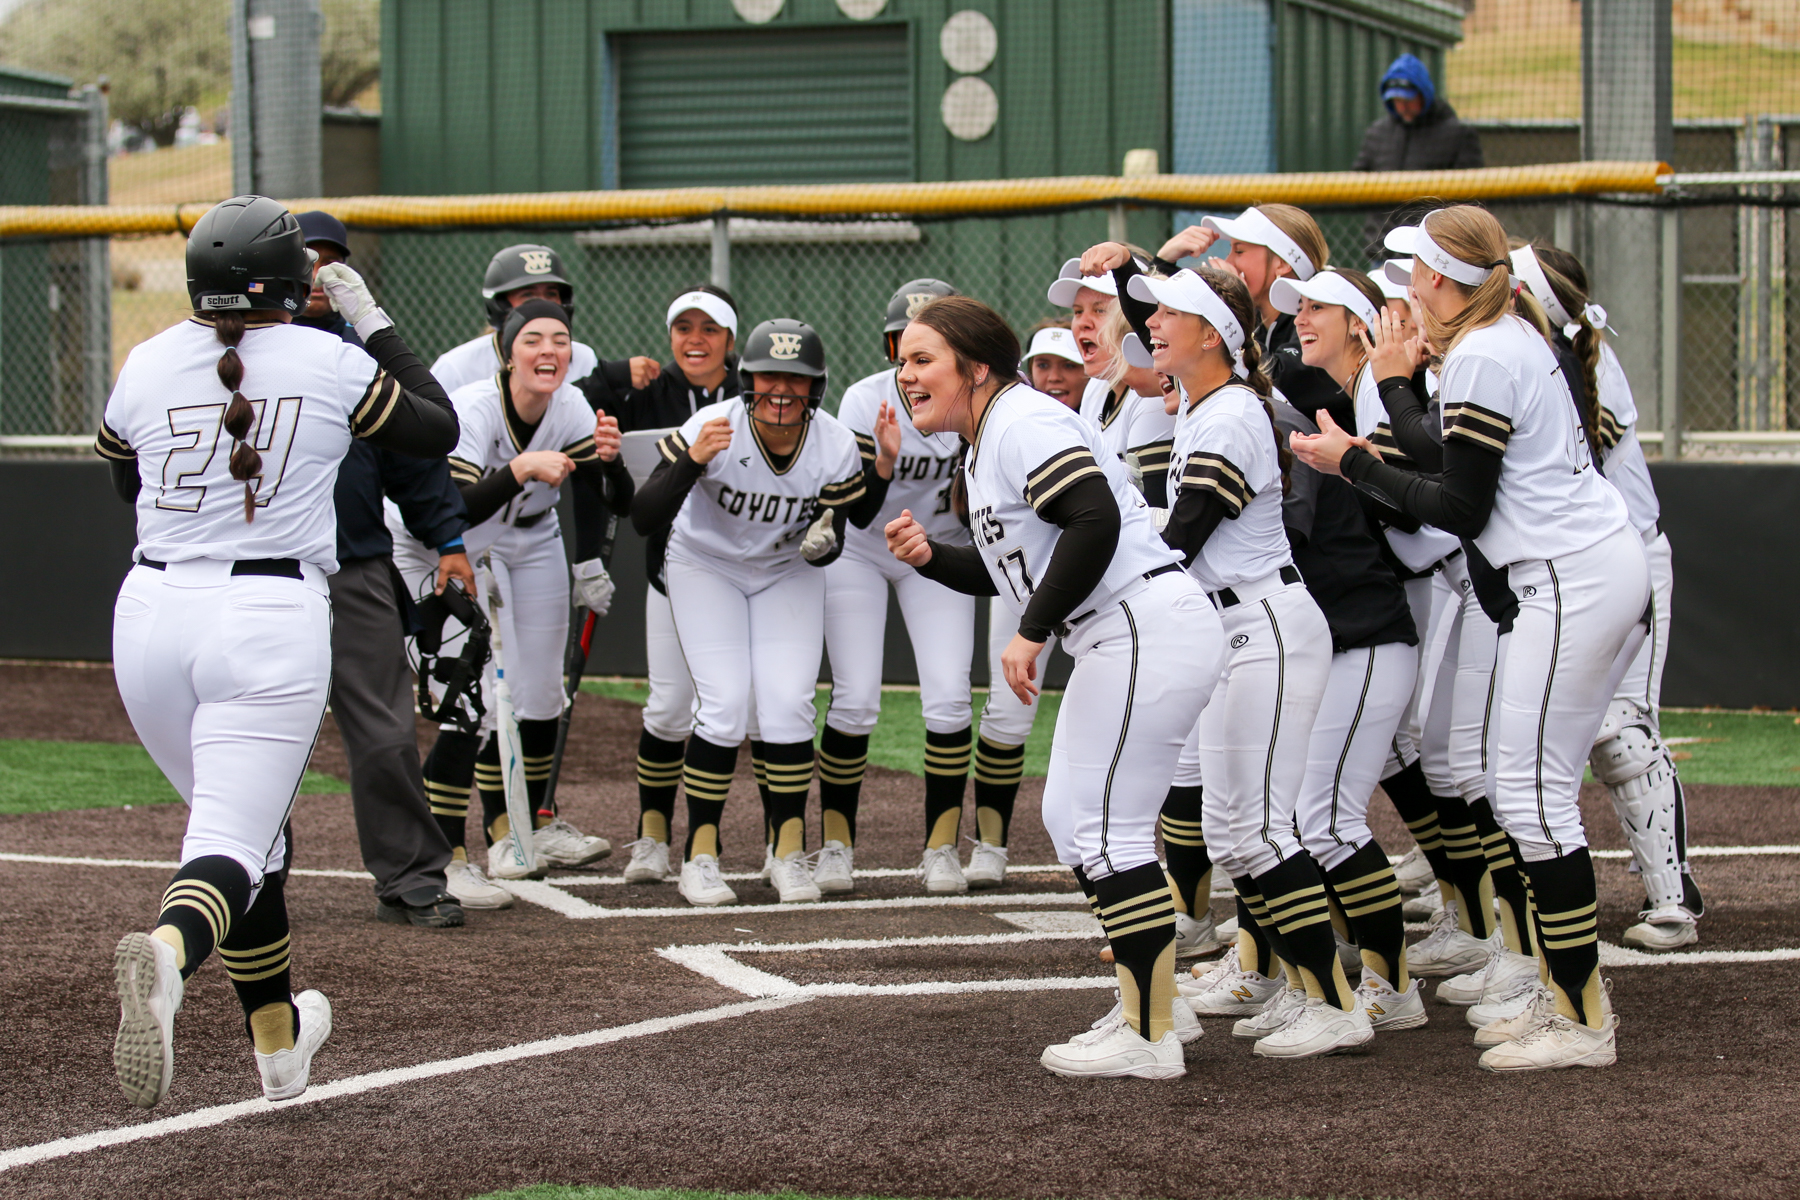 WC faces No. 1 MCC in softball conference opener